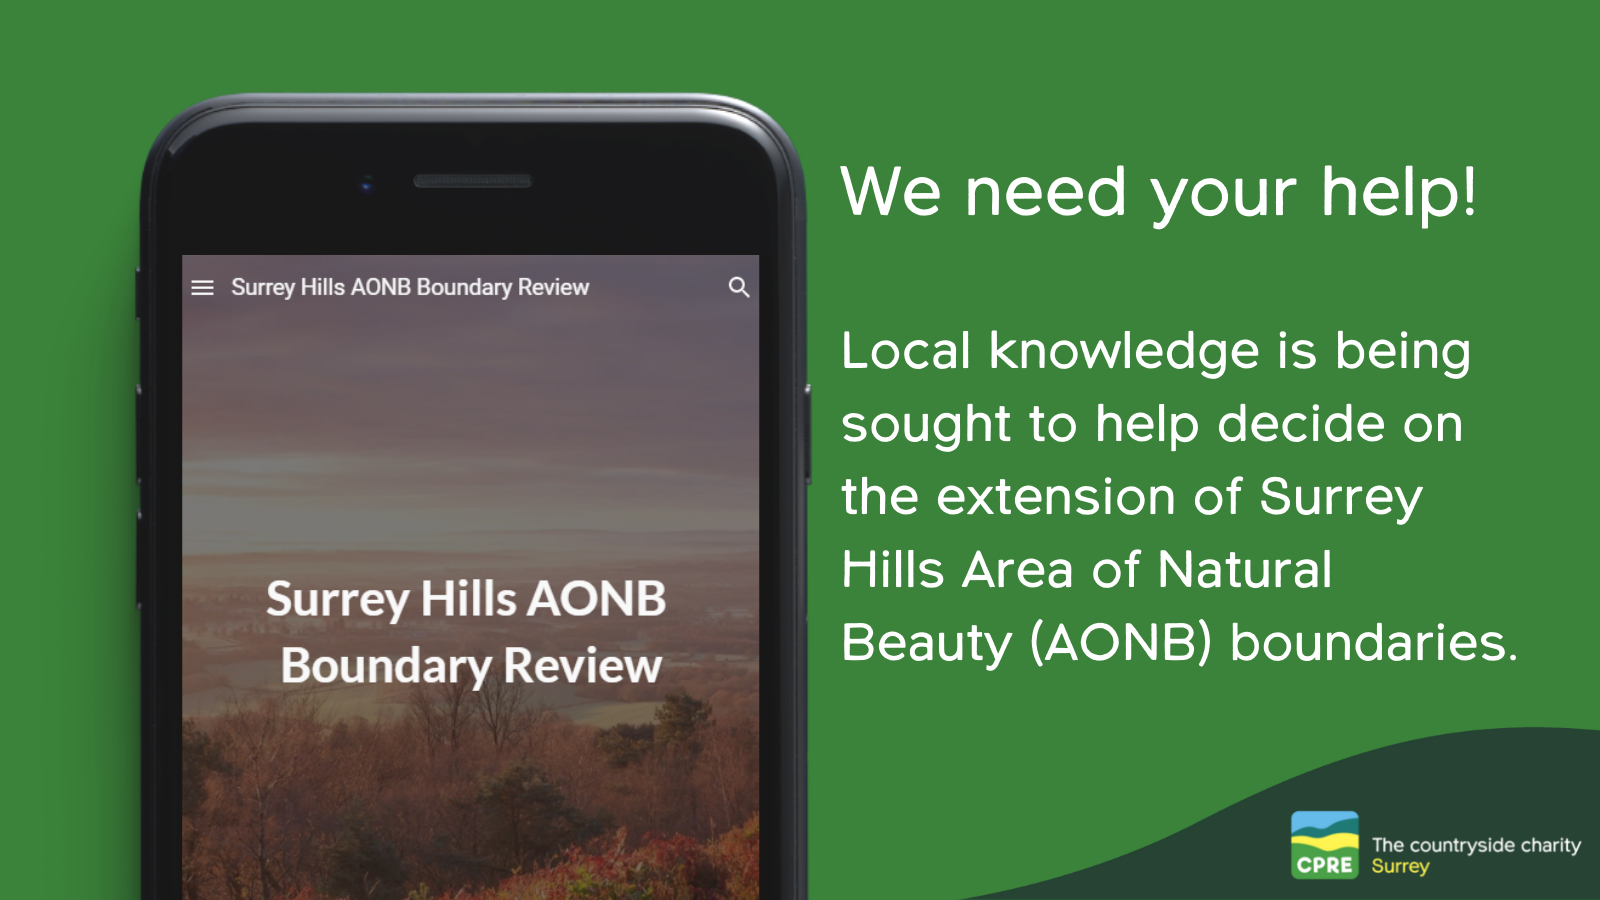 We need your help with the Surrey Hills AONB Boundary Review